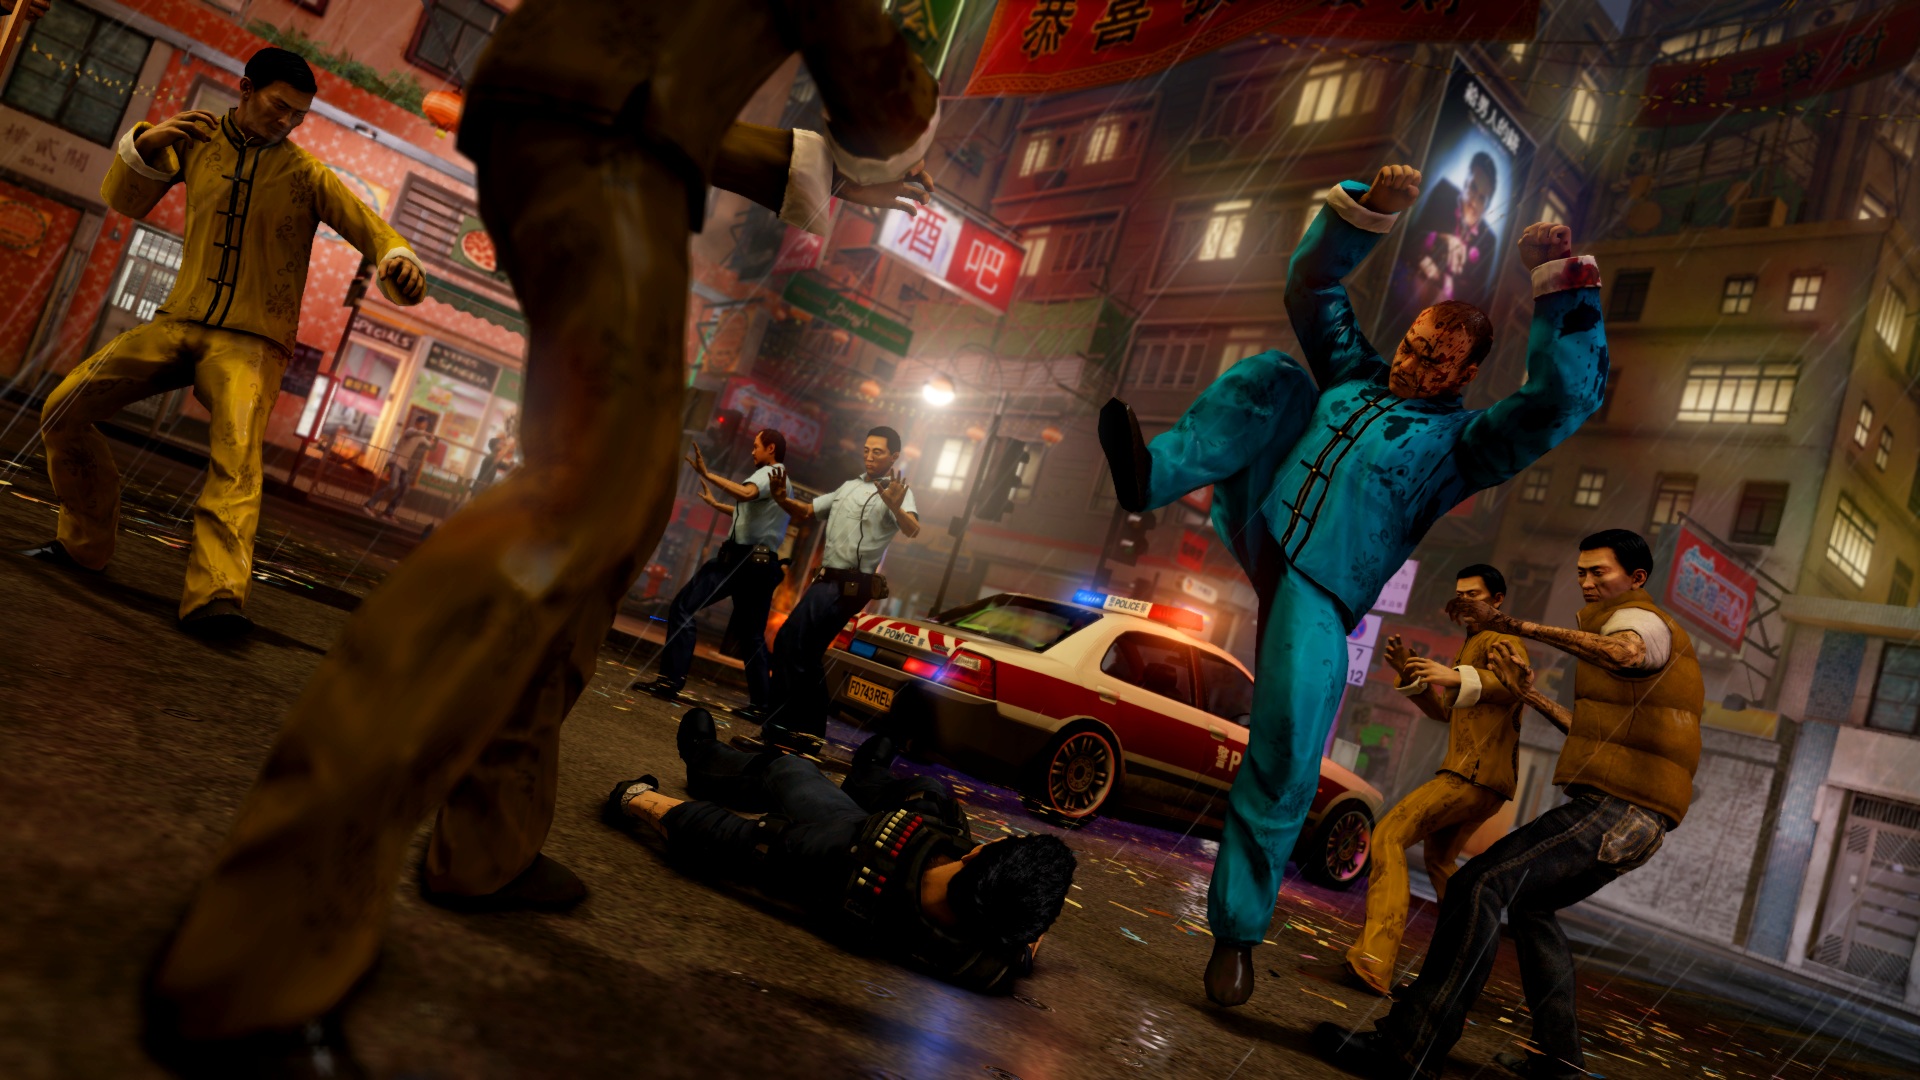 Sleeping Dogs: Definitive Edition Preview - Your First Look At Sleeping Dogs:  Definitive Edition - Game Informer